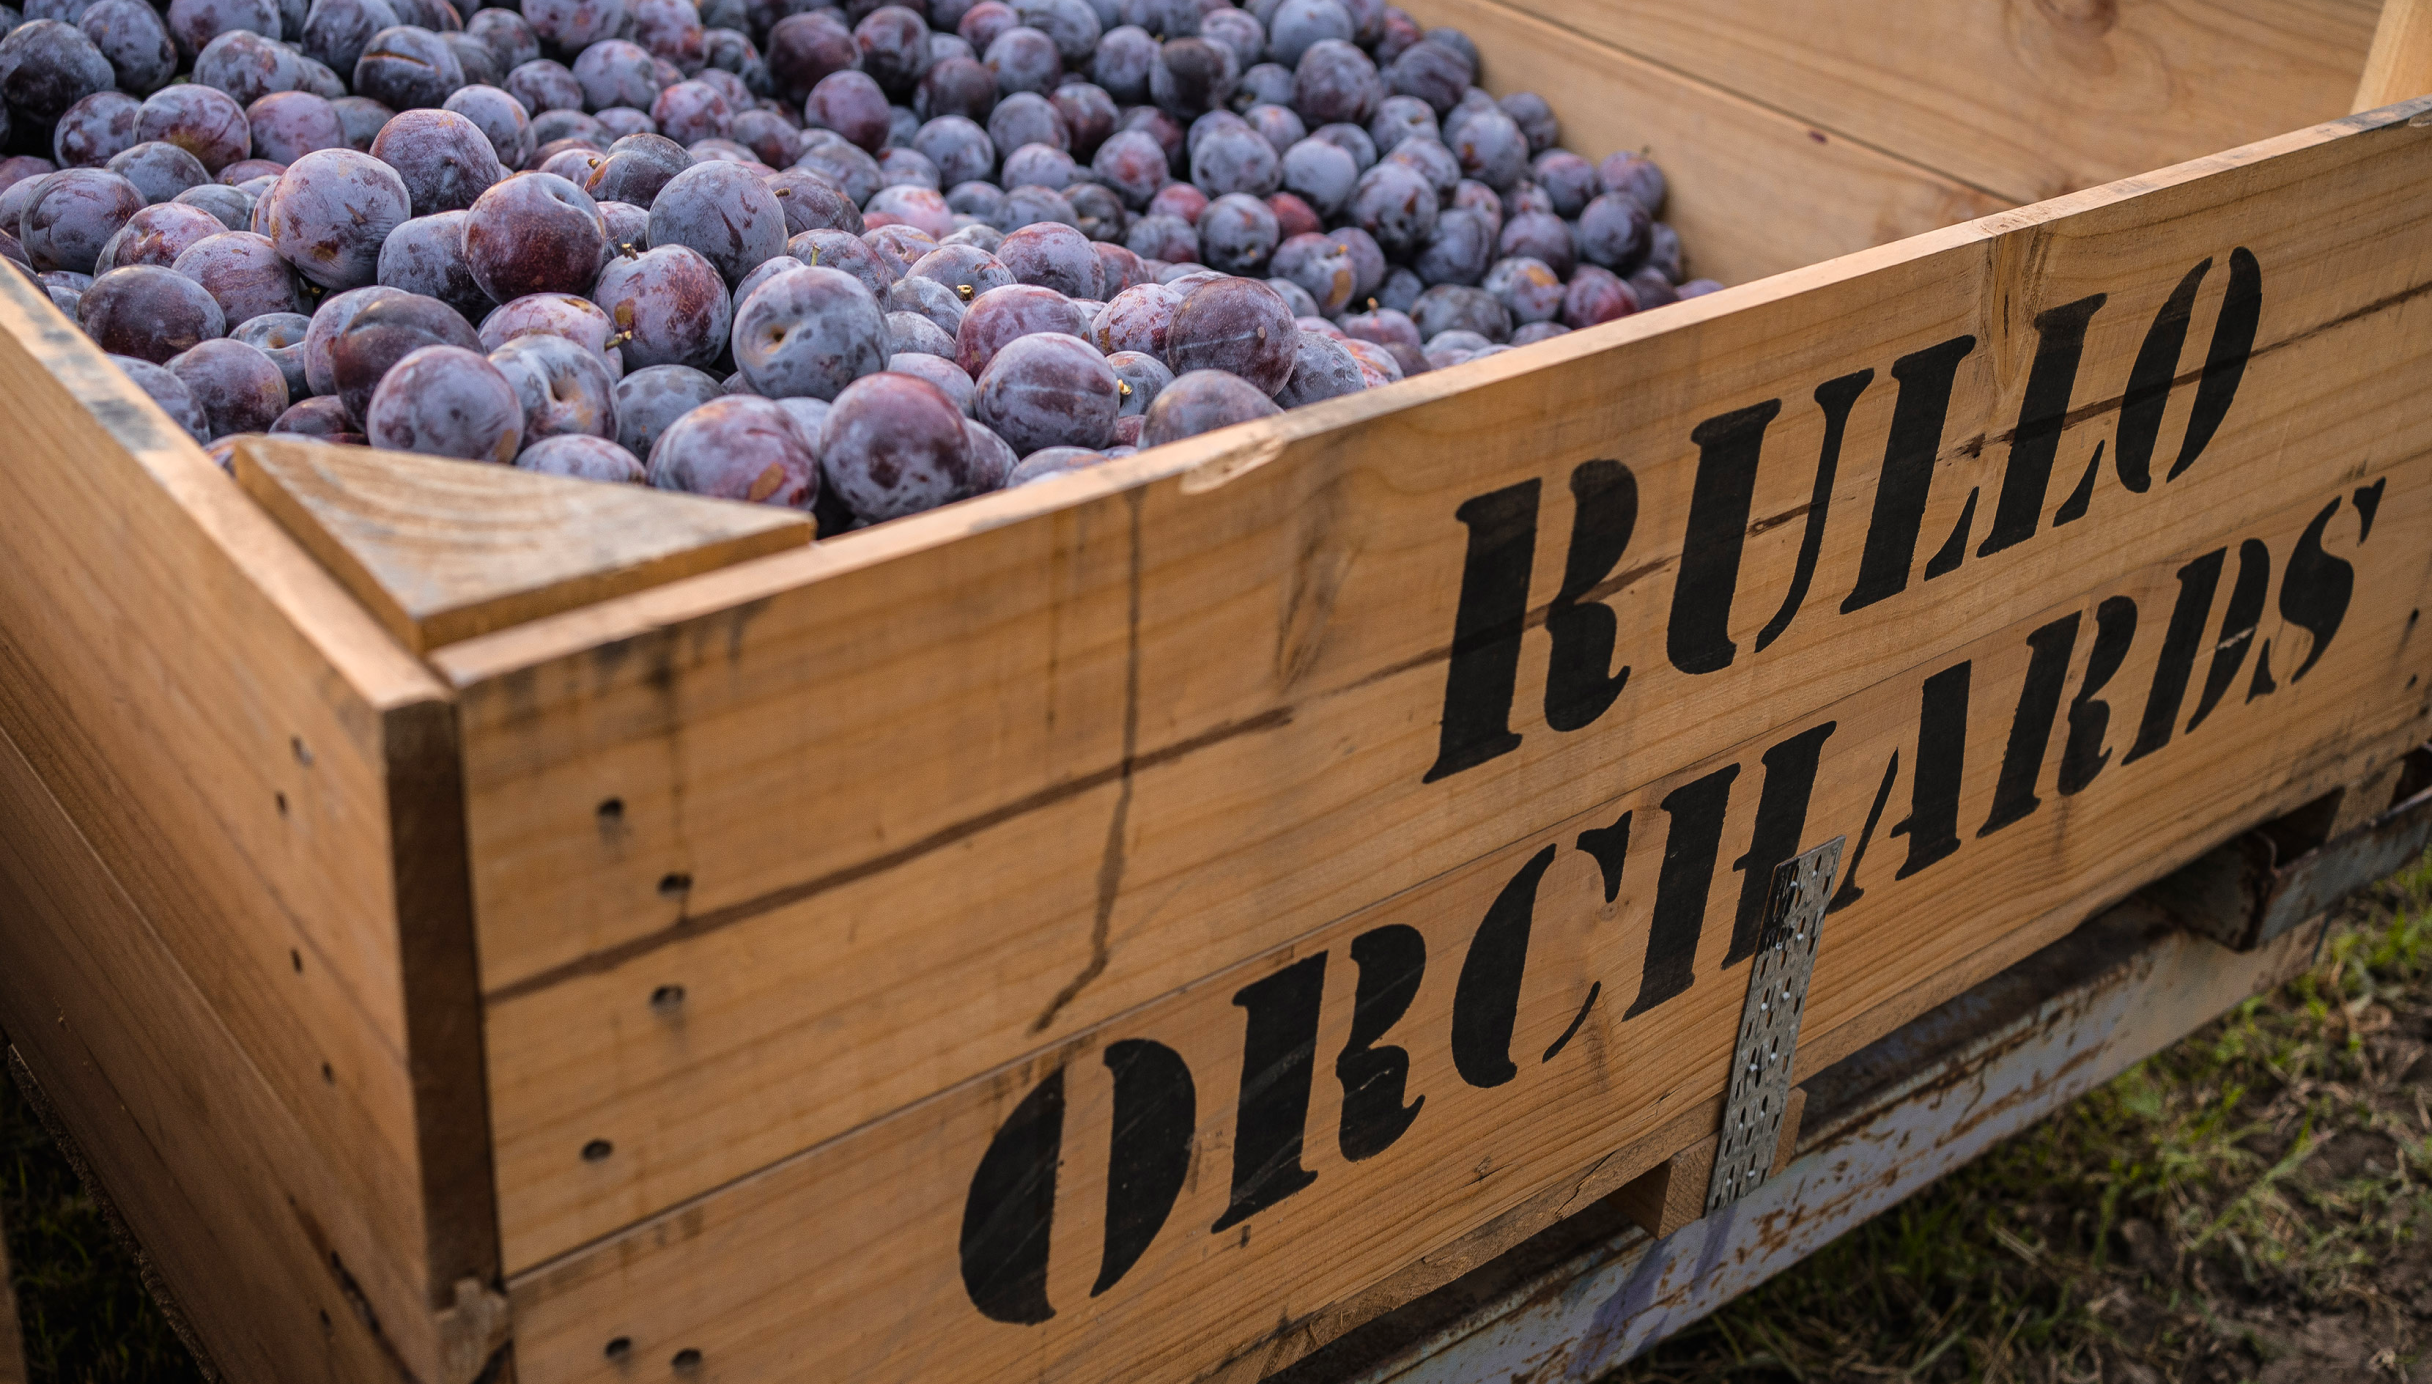 Freshly picked Queen Garnet plums, in a wooden 'Rullo Orchards' box